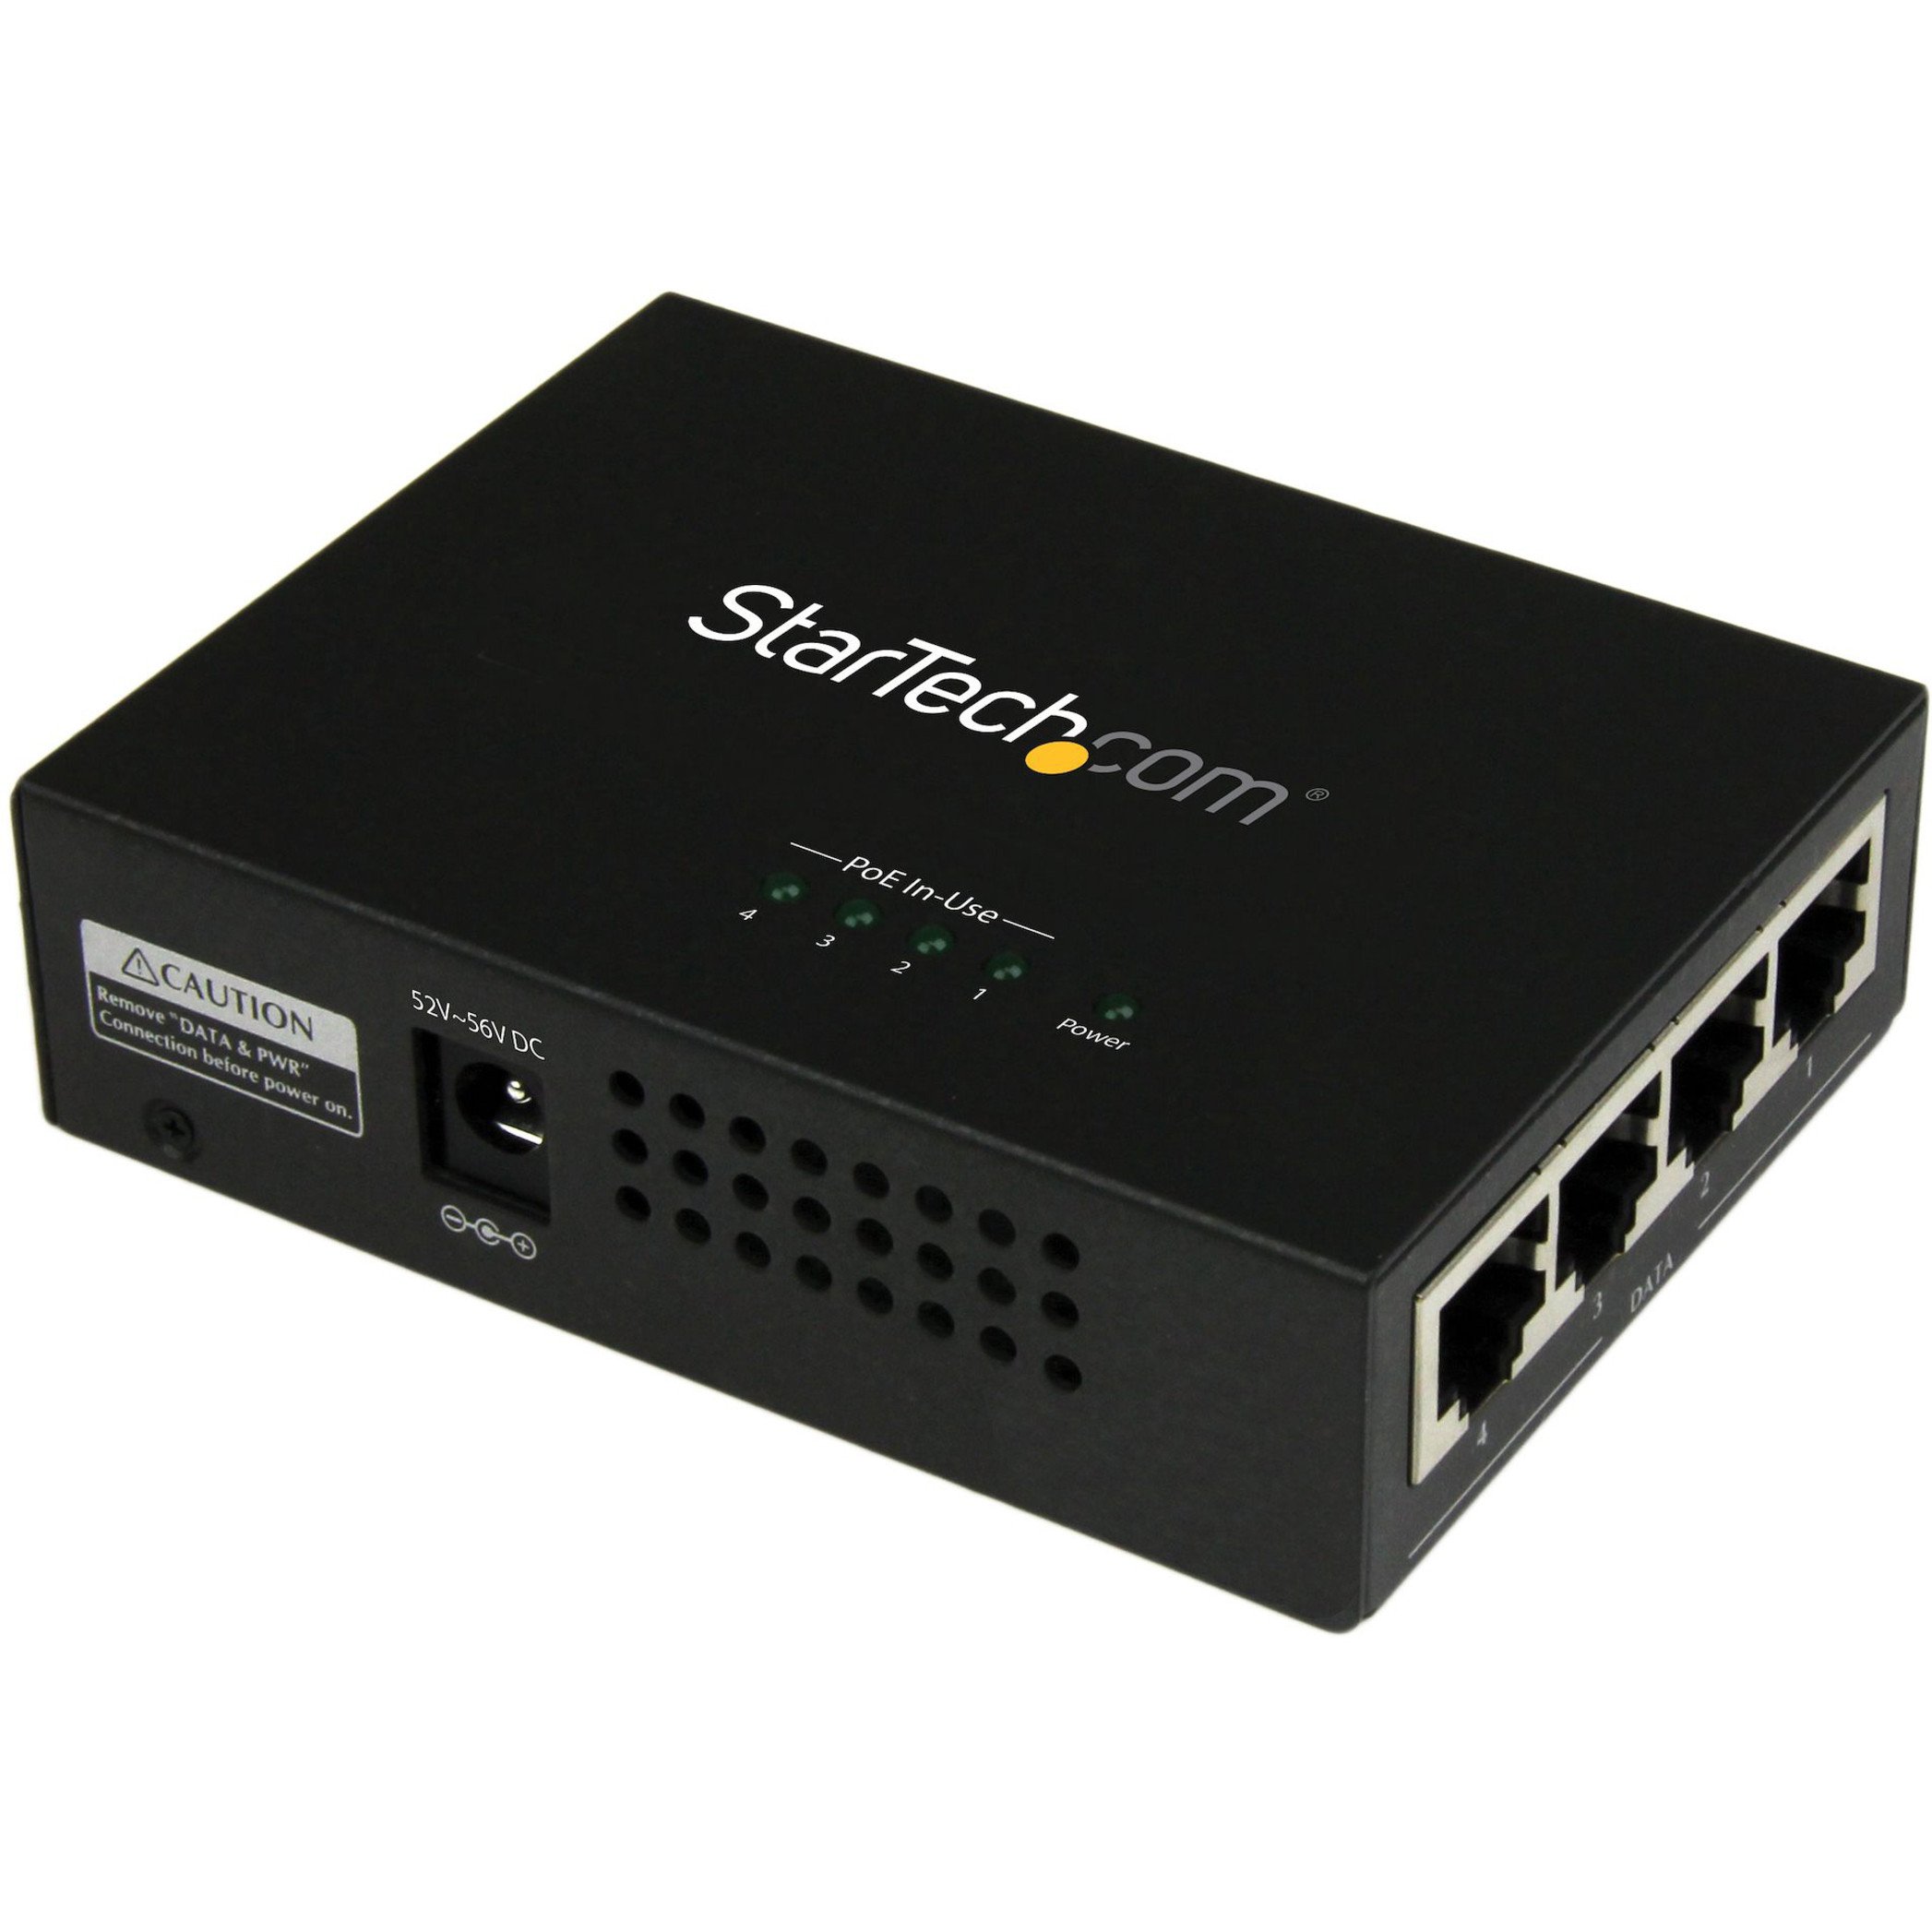 Startech .com 4 Port Gigabit MidspanPoE+ Injector802.3at and 802.3afDeliver power and data to four PoE-powered devices (PD) using this… POEINJ4G